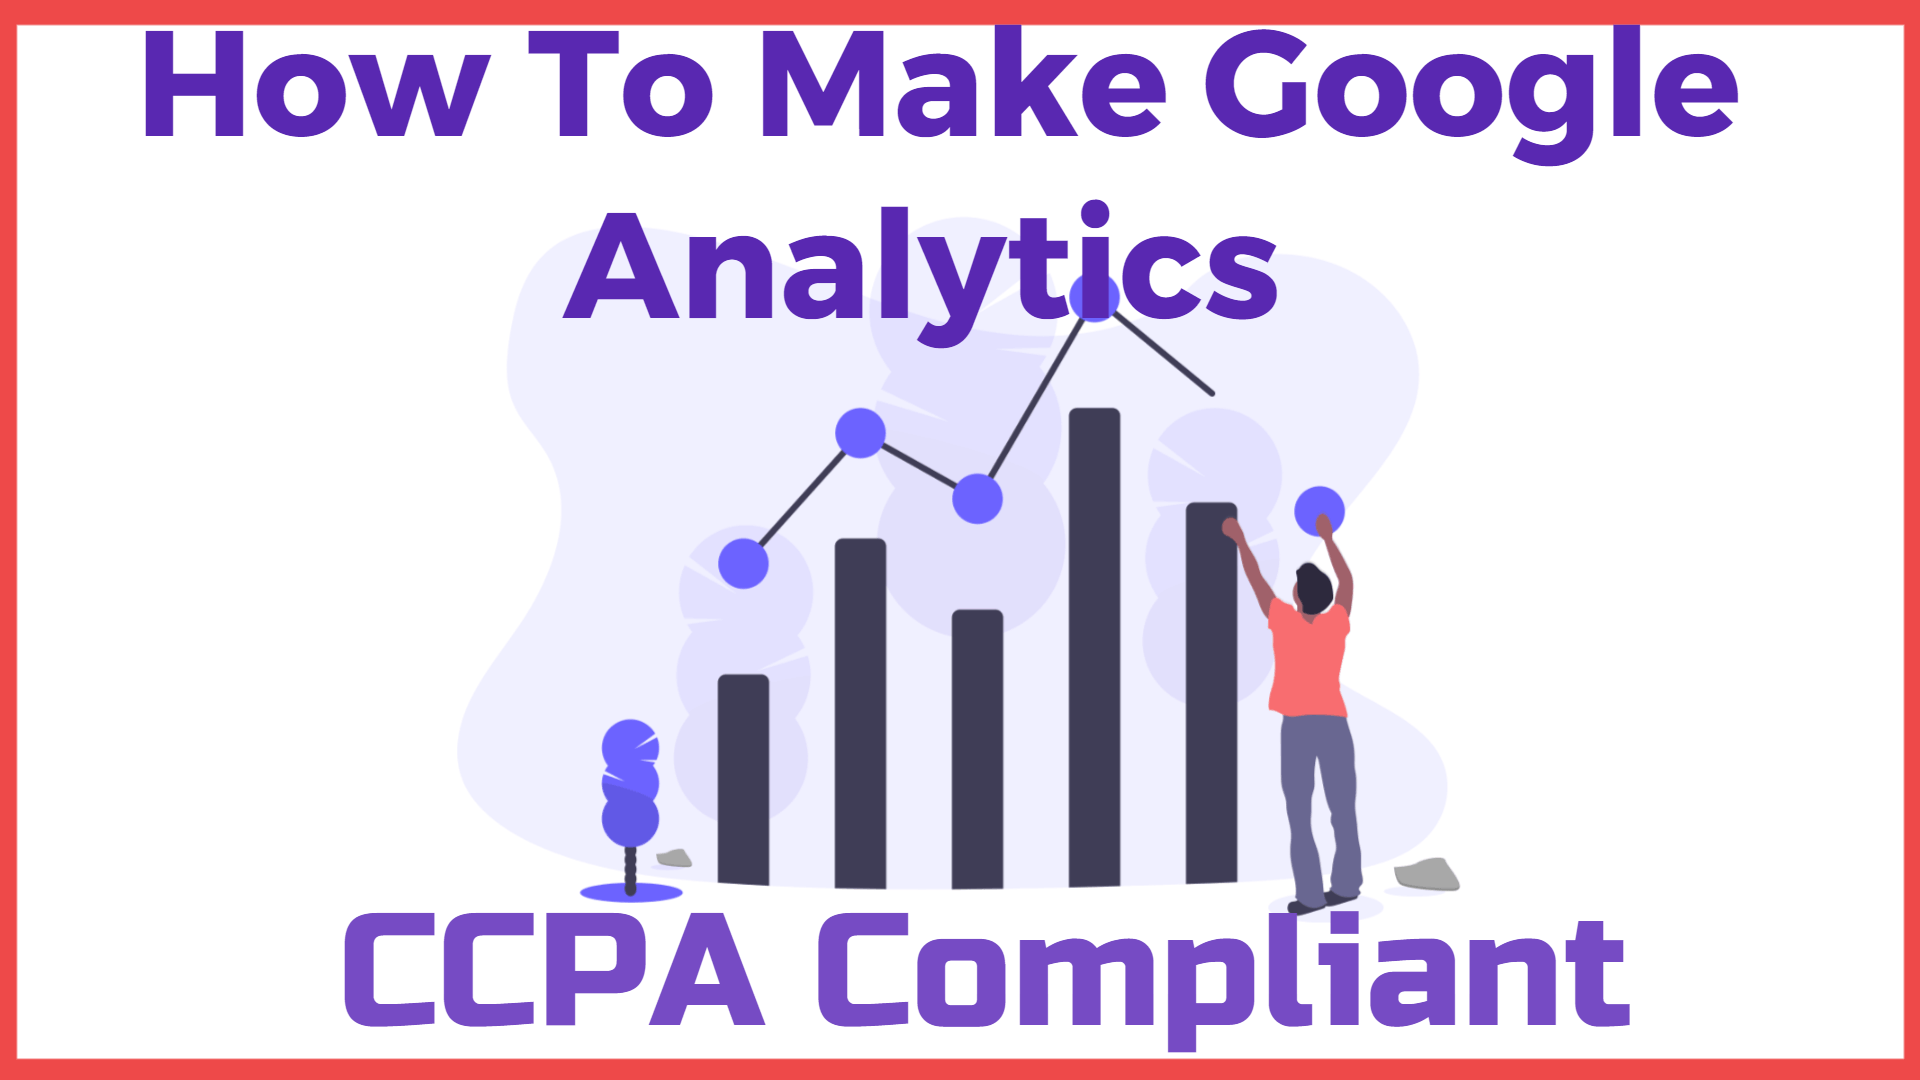 How To Easily Make Your Google Analytics CCPA Compliant